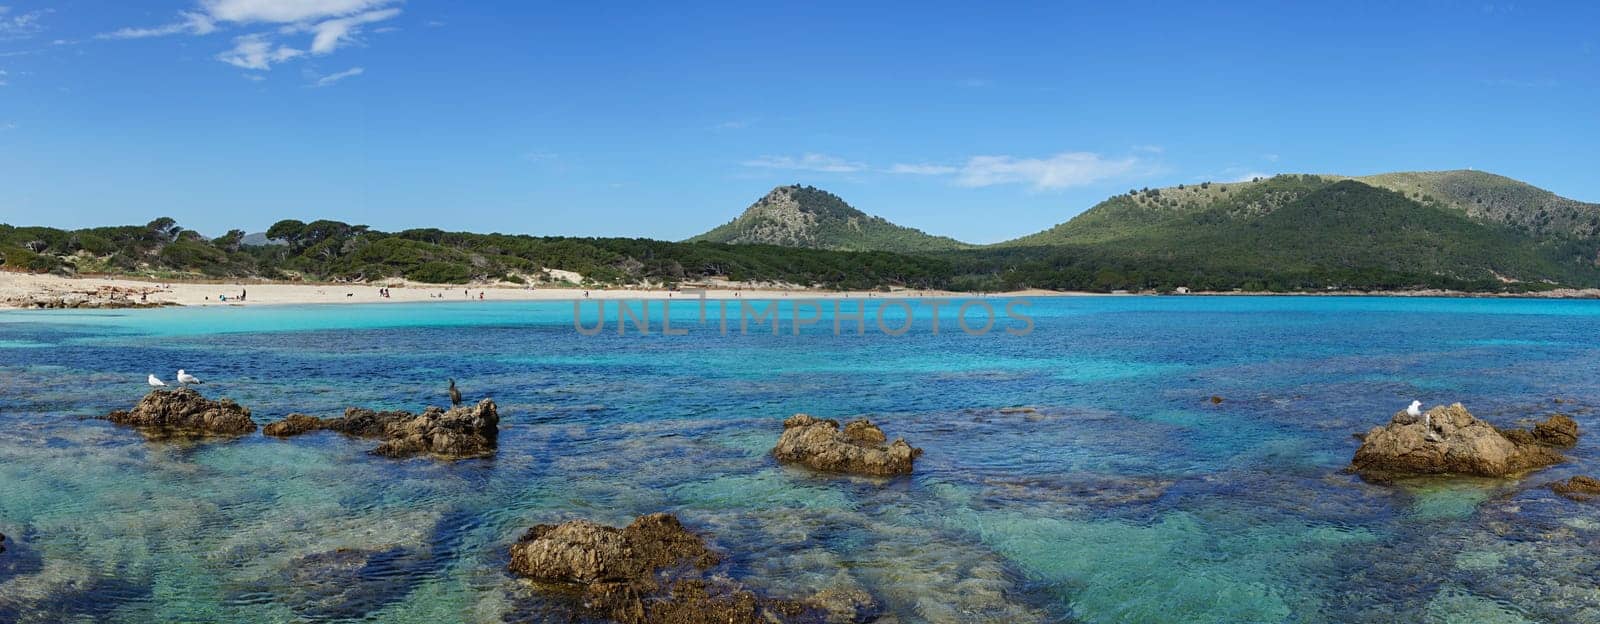 Cala Agulla, a stunning beach in northern Mallorca, bathed in sunlight with clear blue waters and mountains